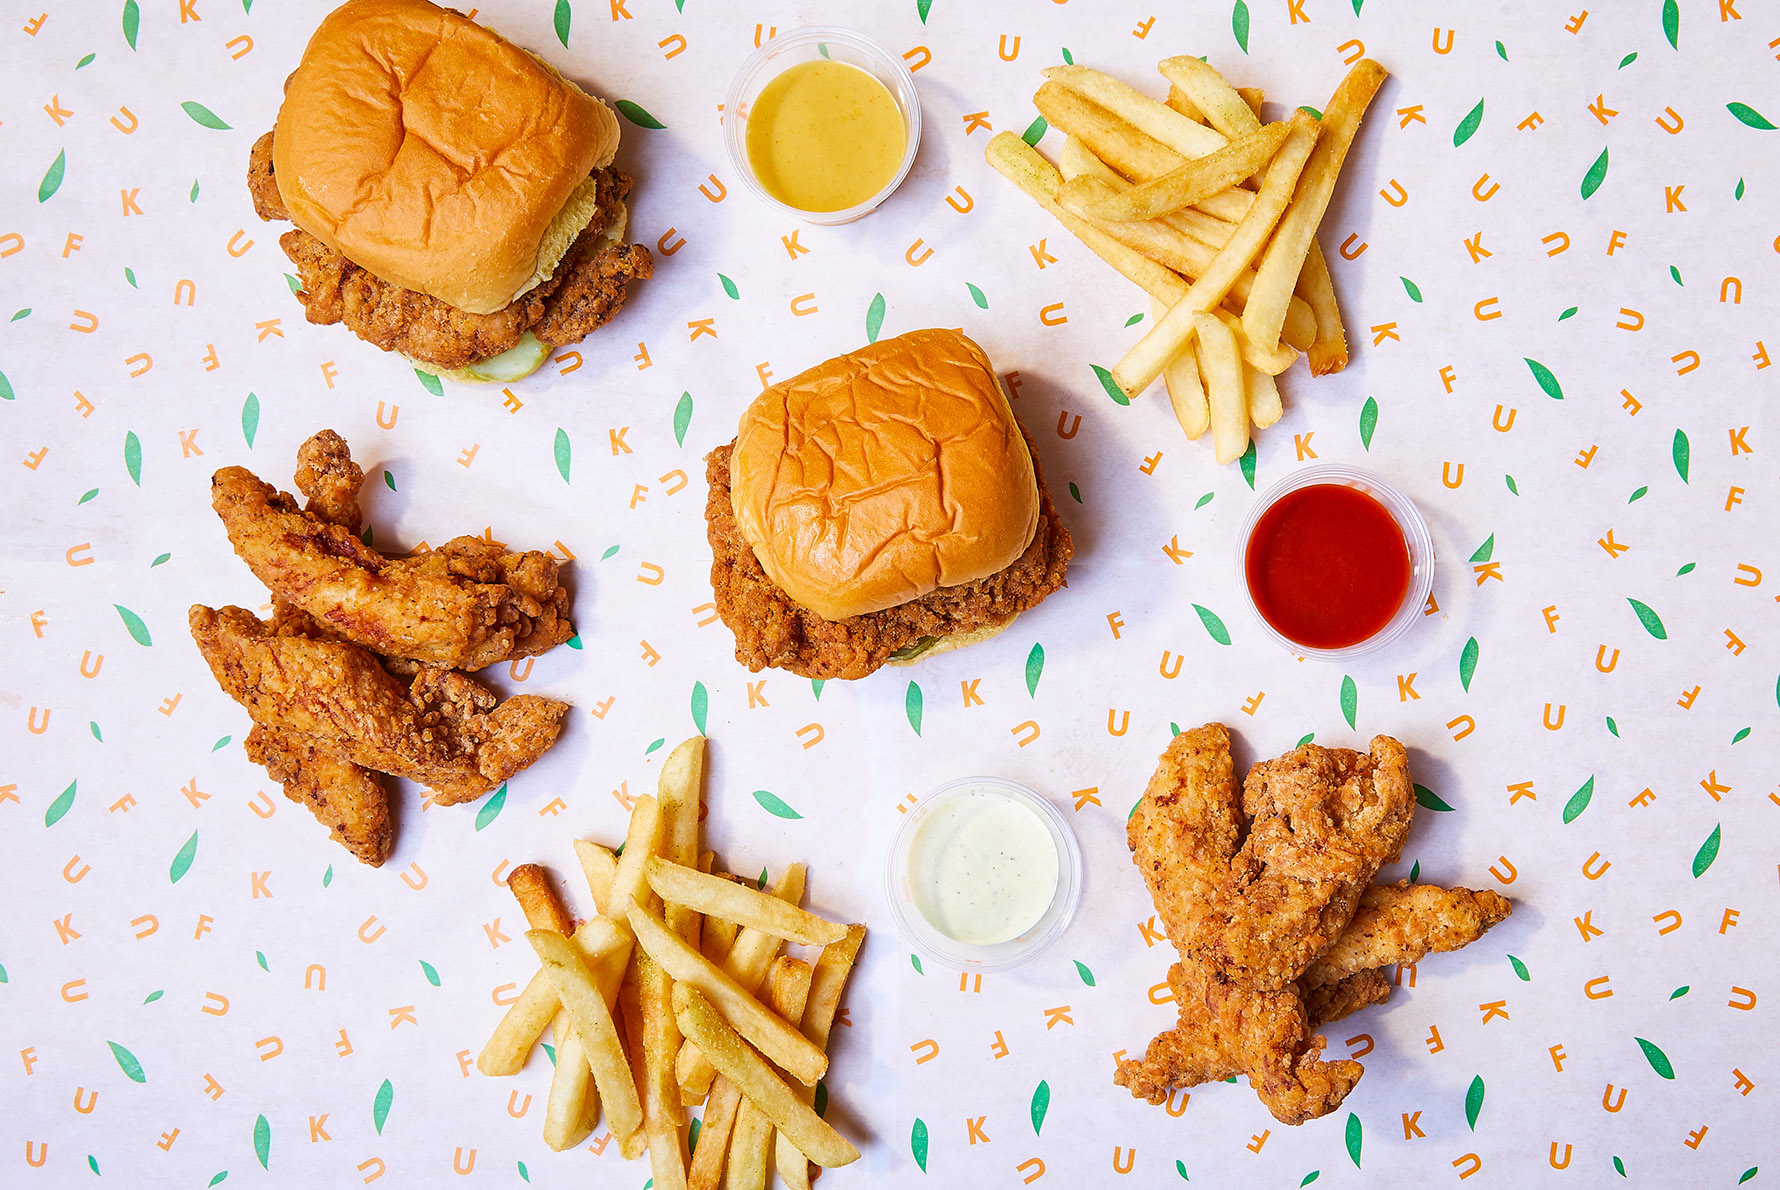 Fuku fried chicken and fries